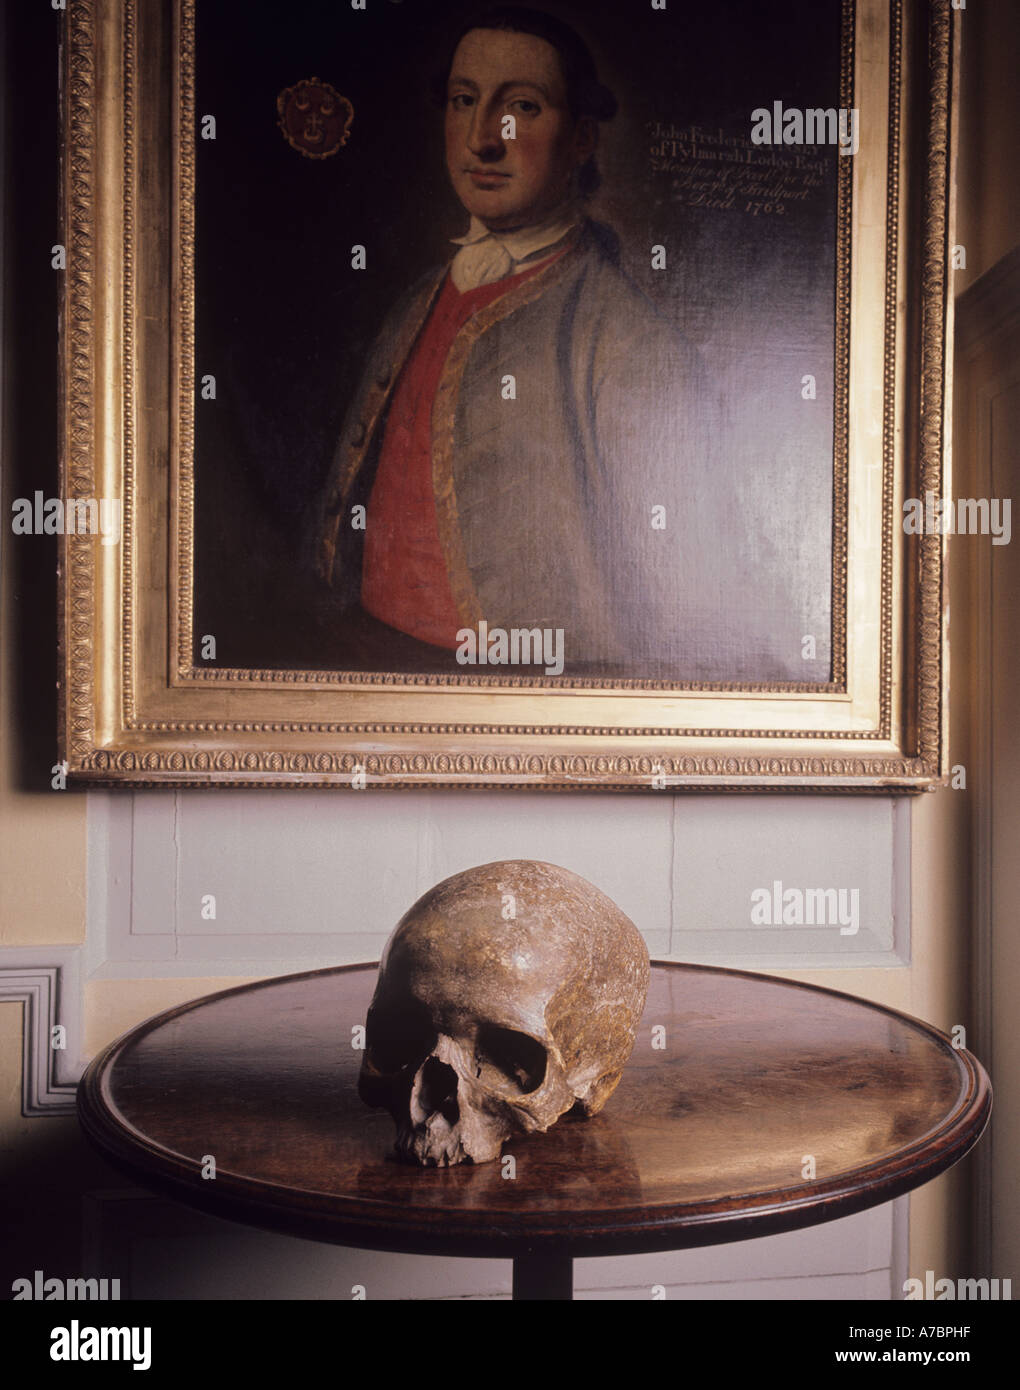 The Screaming Skull of Bettiscomb with portrait of John Frederick Pinney in Bettiscombe Manor Dorset ENGLAND Stock Photo